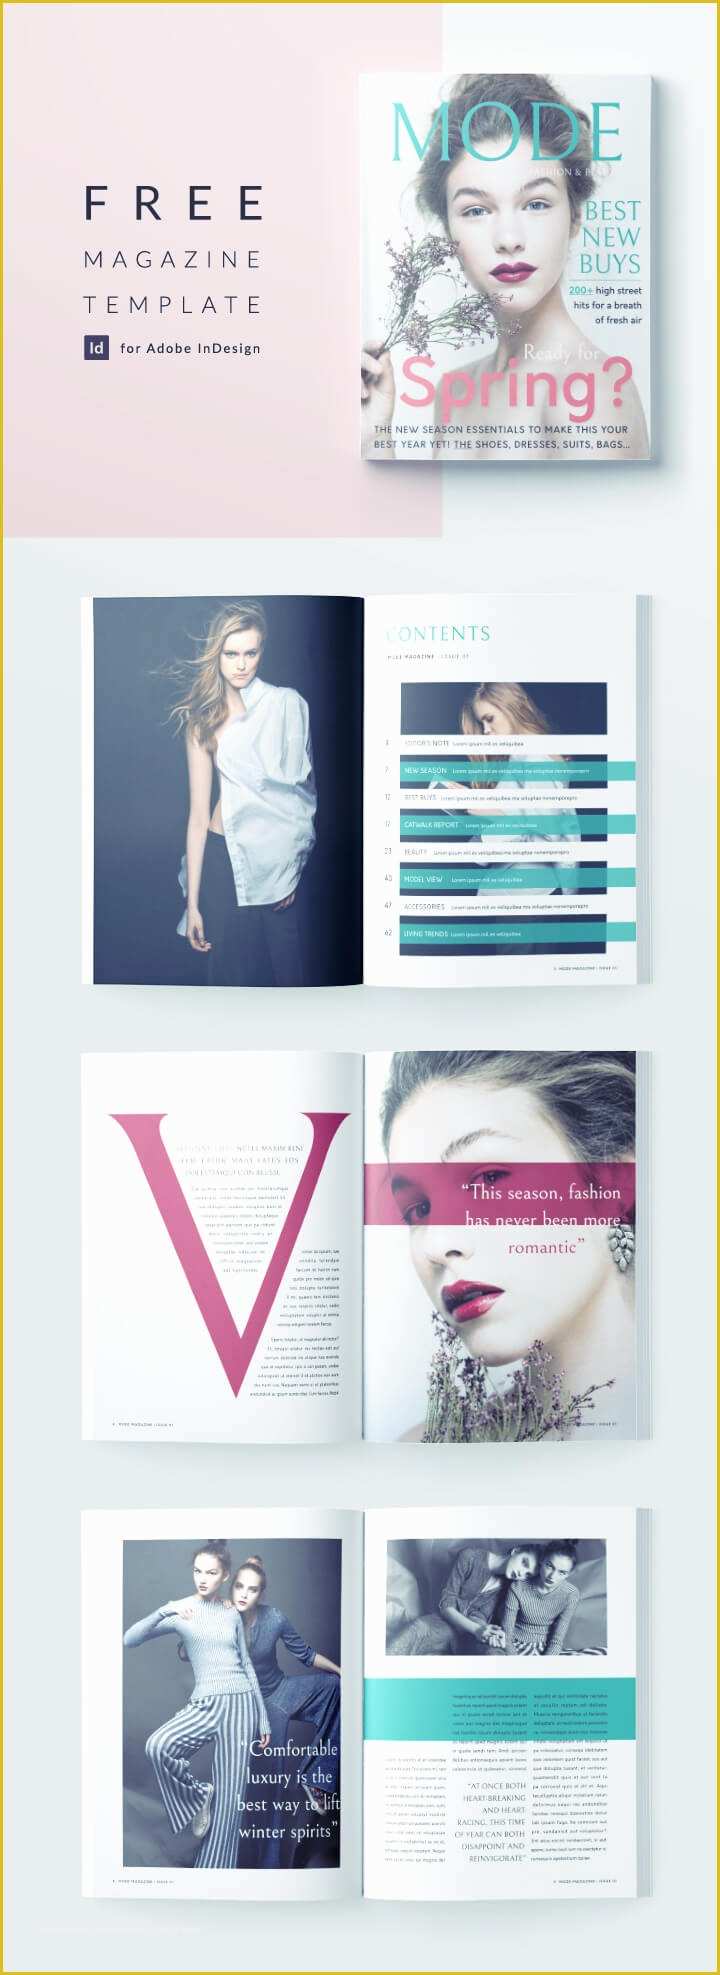 Free Magazine Template Indesign Of Beautiful Fashion Magazine Template for Indesign